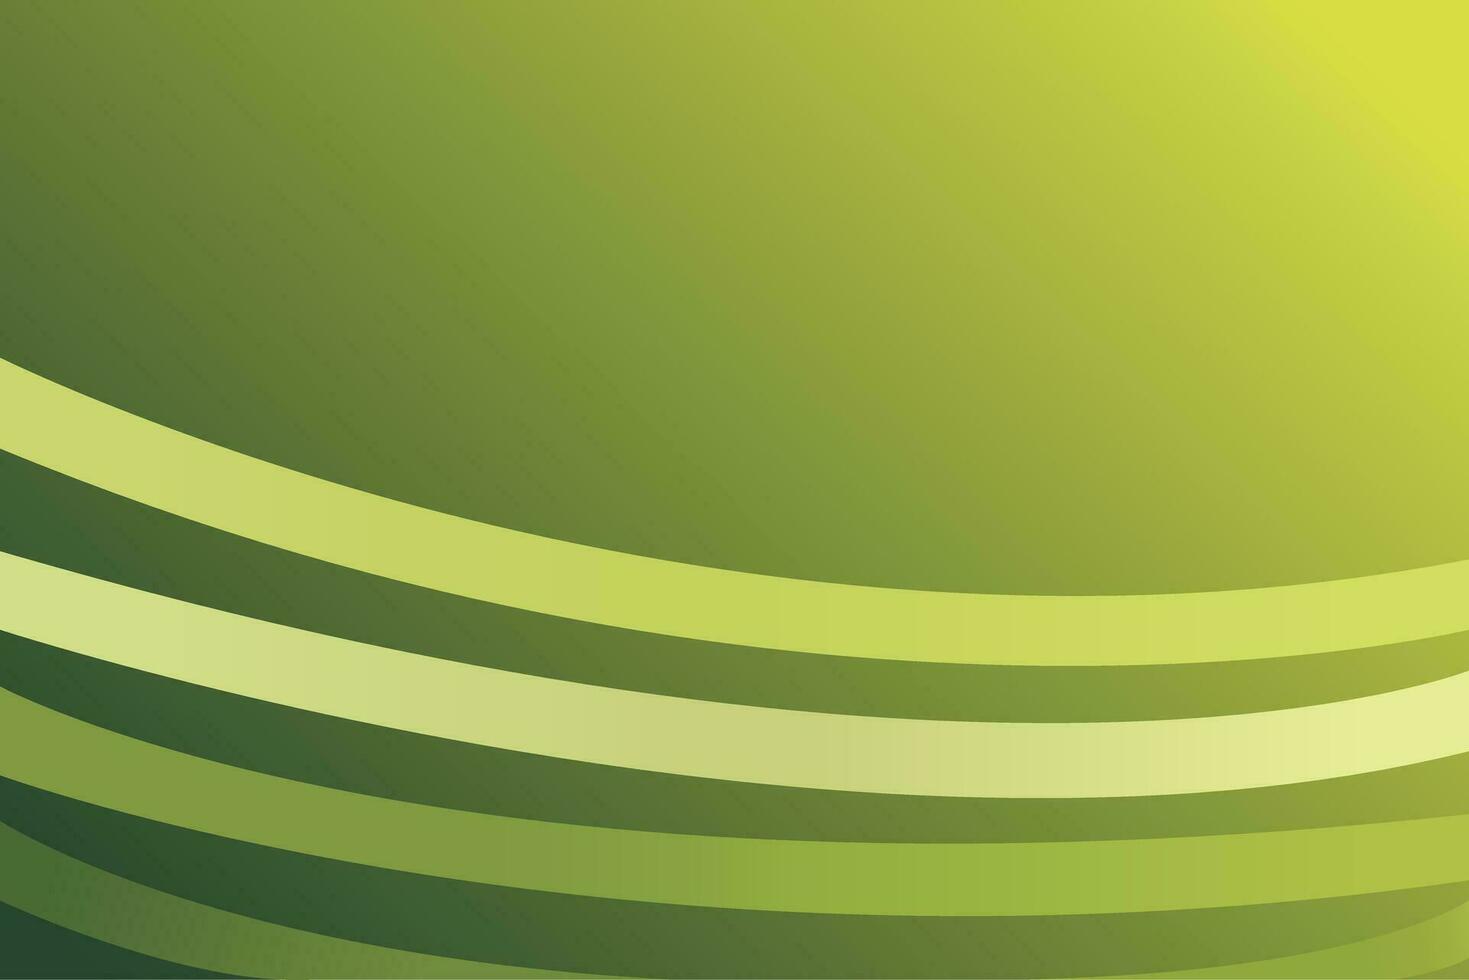 Abstract lime green curves background. Vector illustration